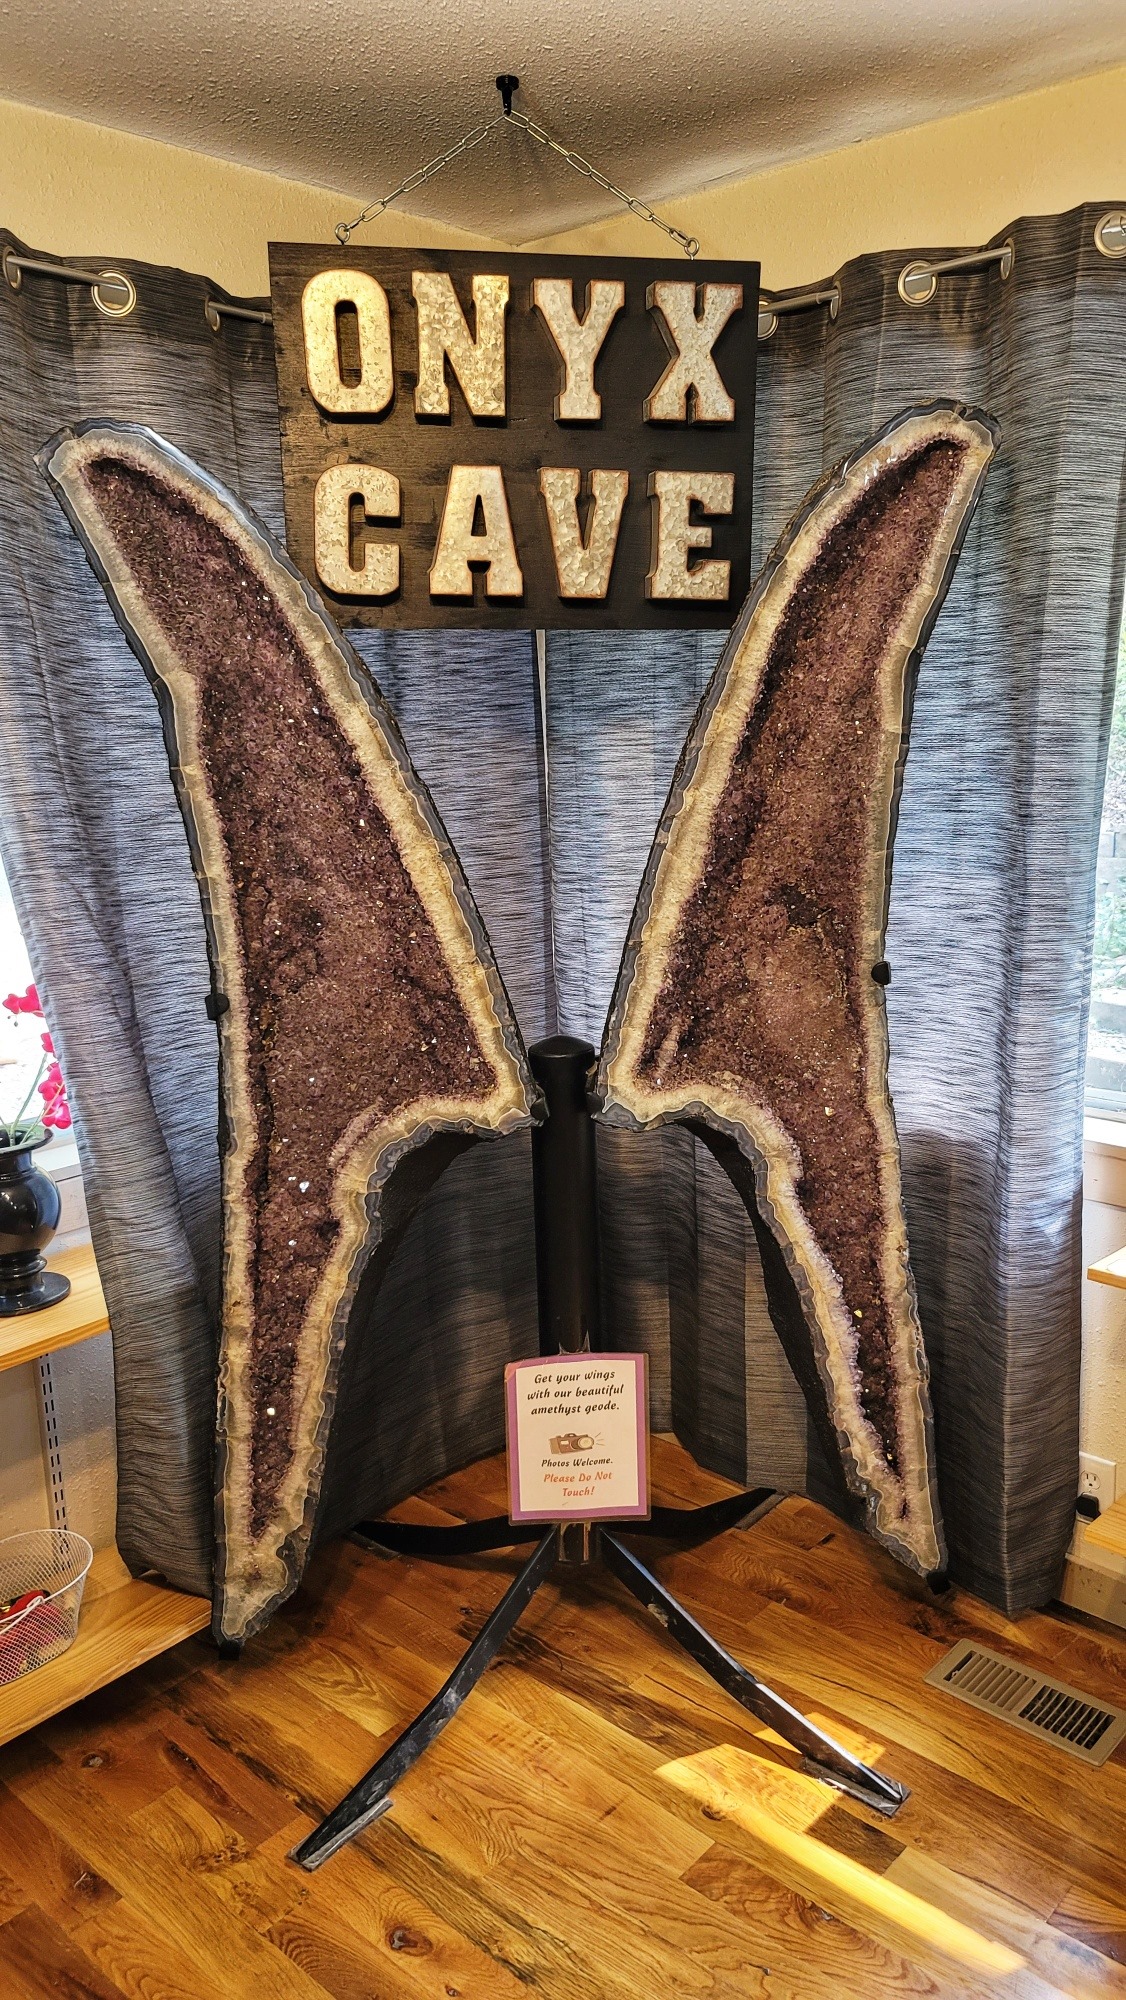 Onyx Cave is a small show cave located near Eureka Springs, Arkansas. The cave d